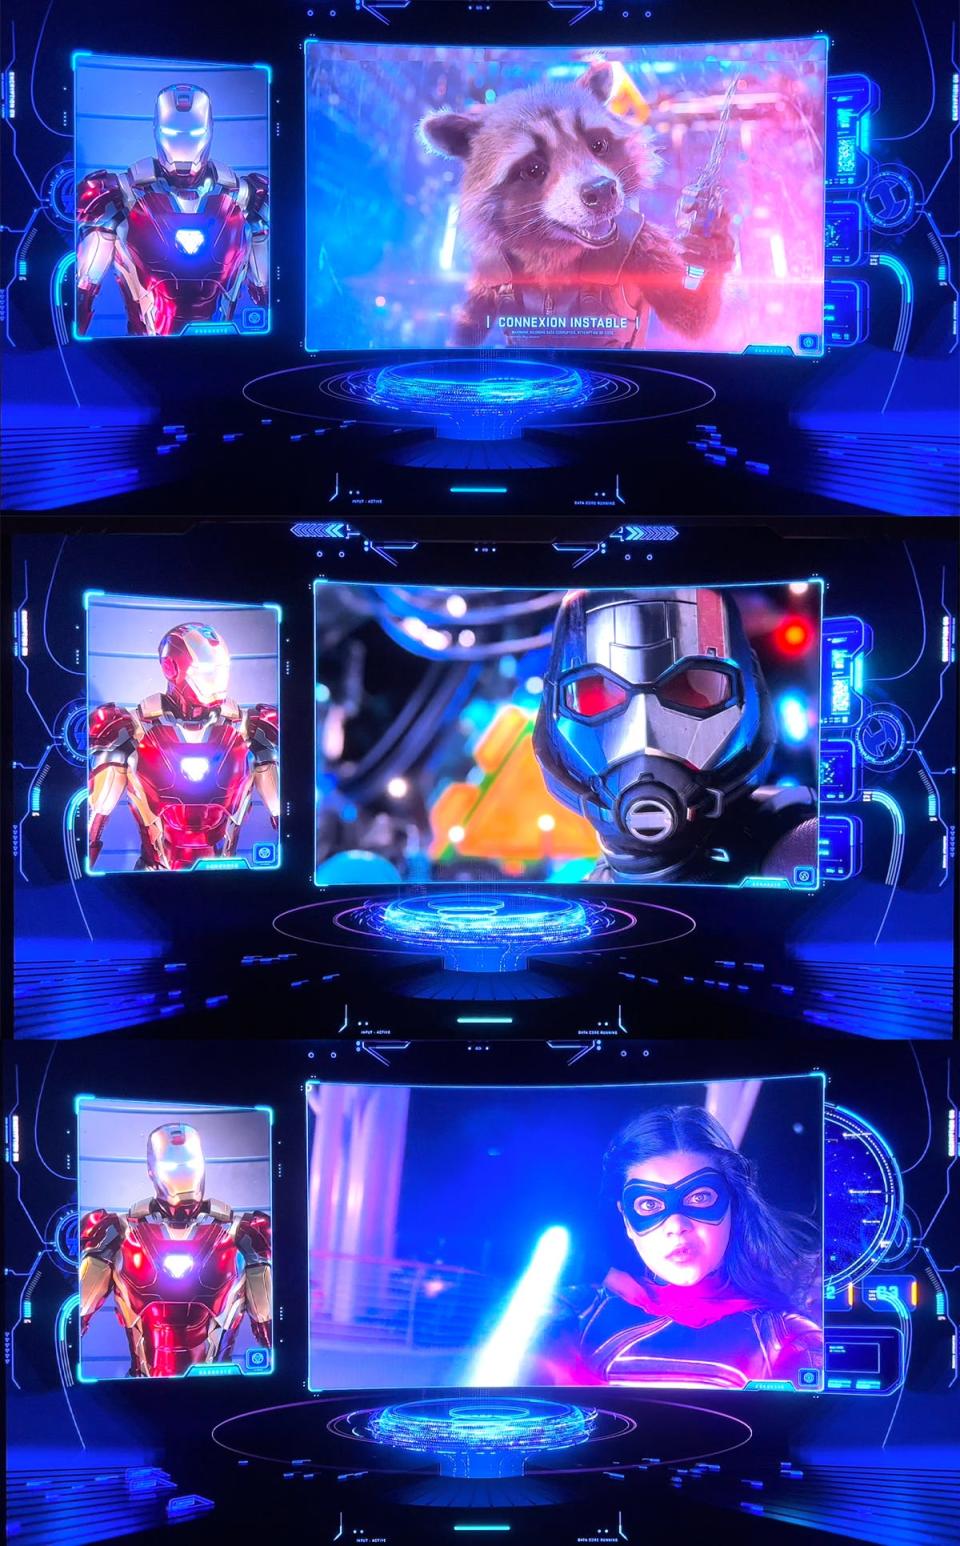 Rocket Raccoon, Ant-Man, and Ms. Marvel appear in the queue video for Avengers Assemble: Flight Force at Avengers Campus in Disneyland Paris.